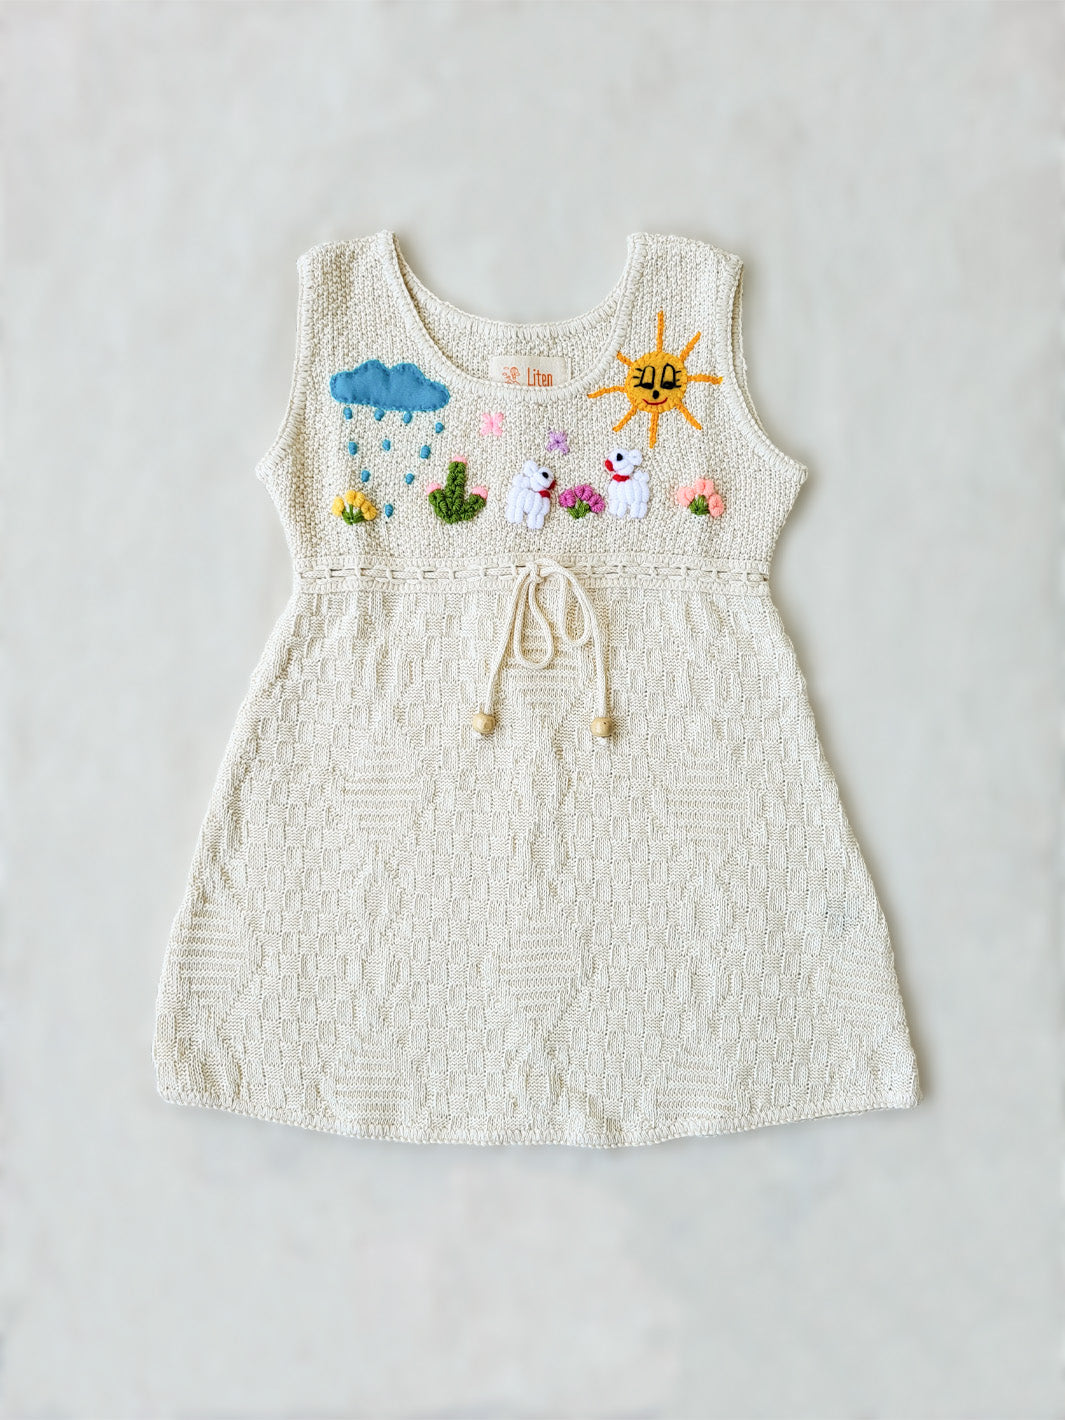 Liten Avevnturis Collections. Our Ñusta dress is the cutest look for your special little one! Delicately hand-embroidered, by Peruvian artisans, with adorable animals and elements from nature. Made in all Peruvian knitted tanguis cotton with delicately knitted terminations. Plus, the bottom part has a fun geometrical design that'll have your mini fashionista stand out from the crowd! Ethically made in Peru. Ekologisk klänning för flickor och bebisar.